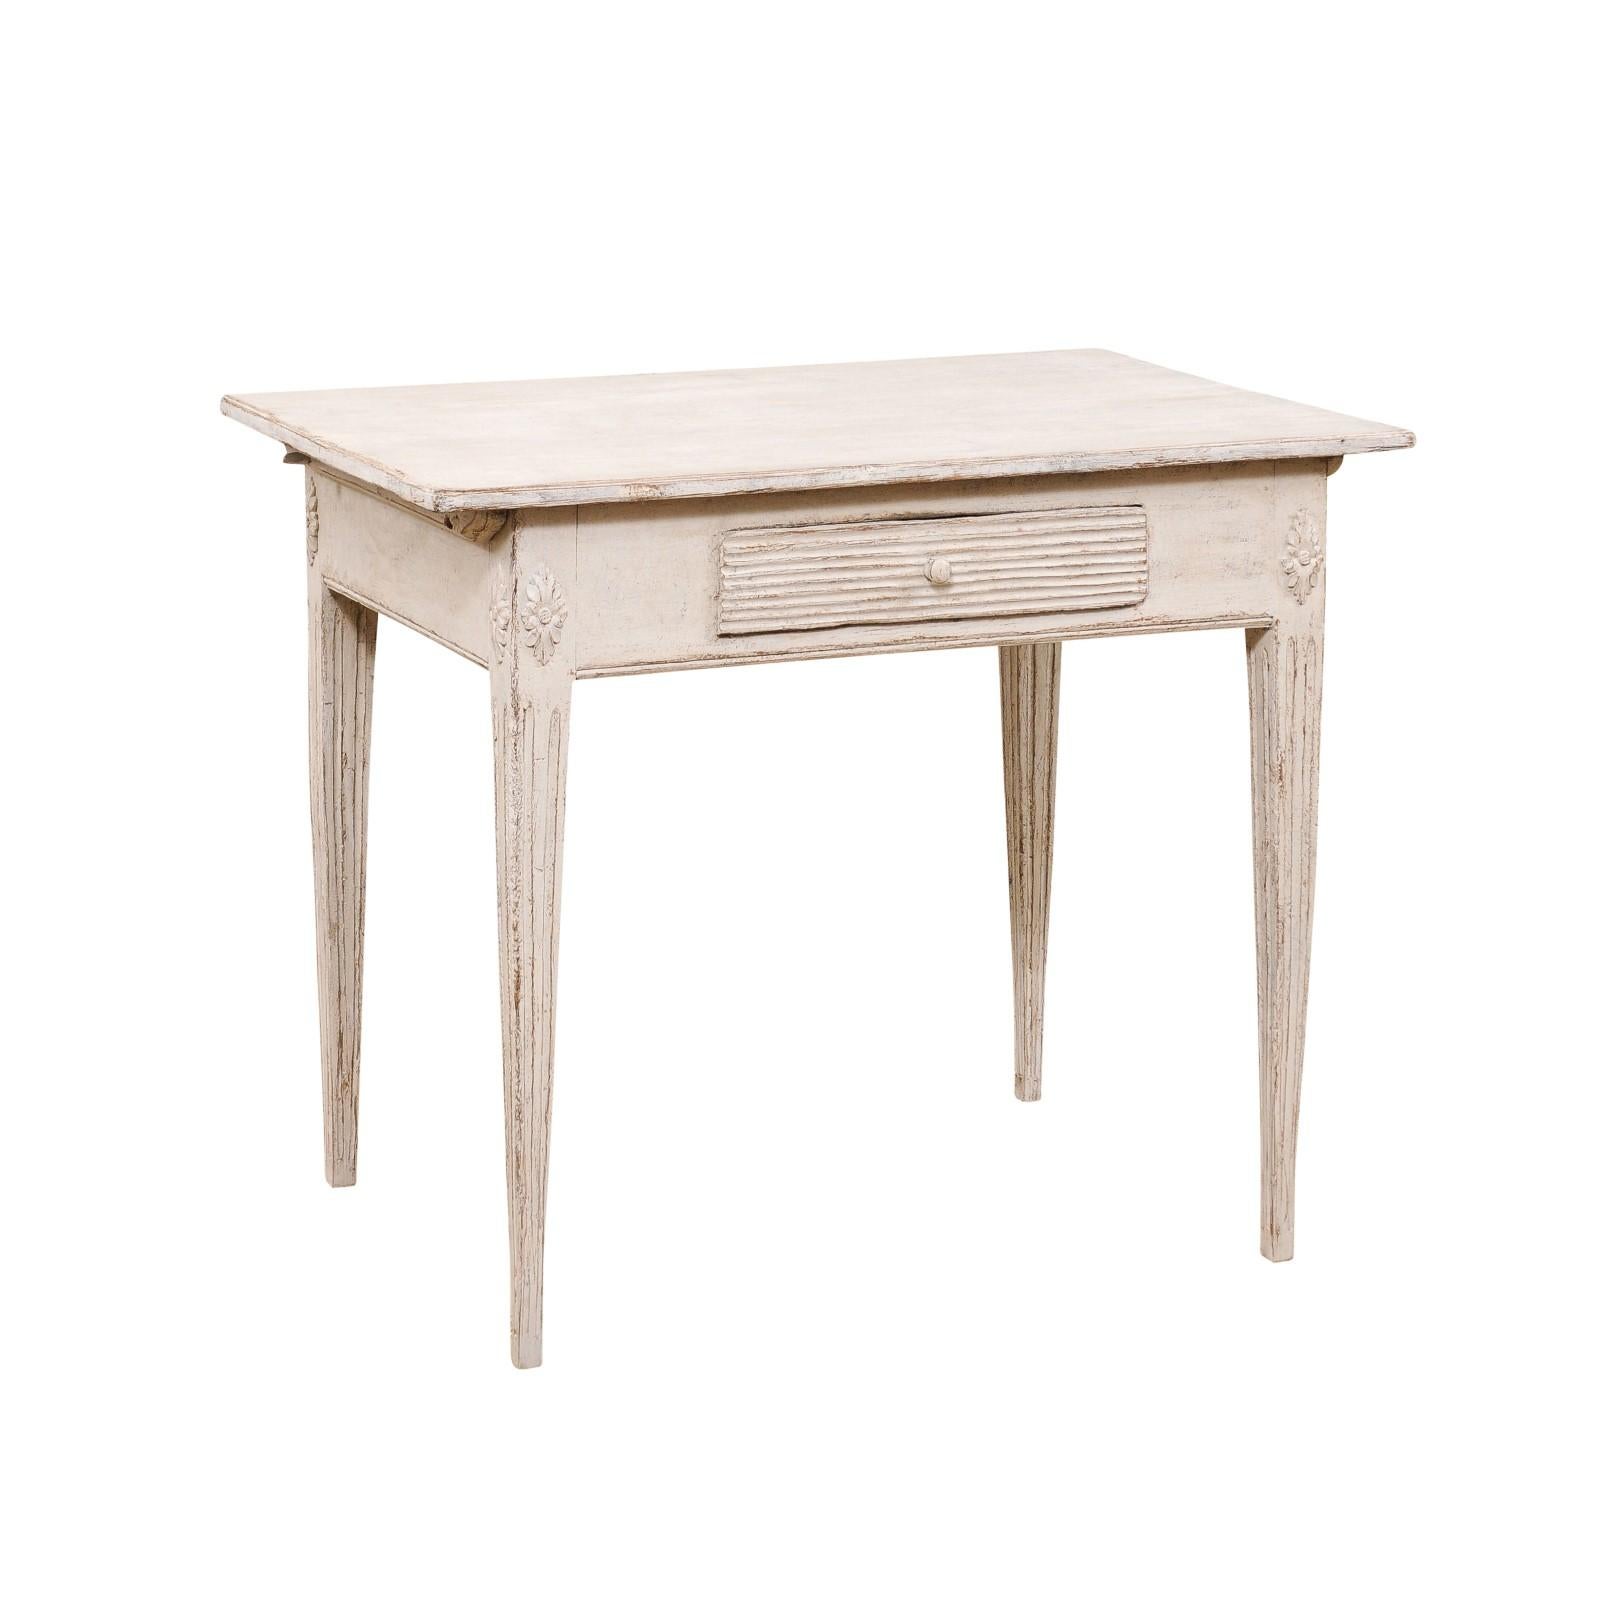 A Swedish Gustavian style painted wood side table from the late 19th century, with reeded drawer, carved rosettes and fluted legs. Created in Sweden during the last quarter of the 19th century, this painted side table features a rectangular top